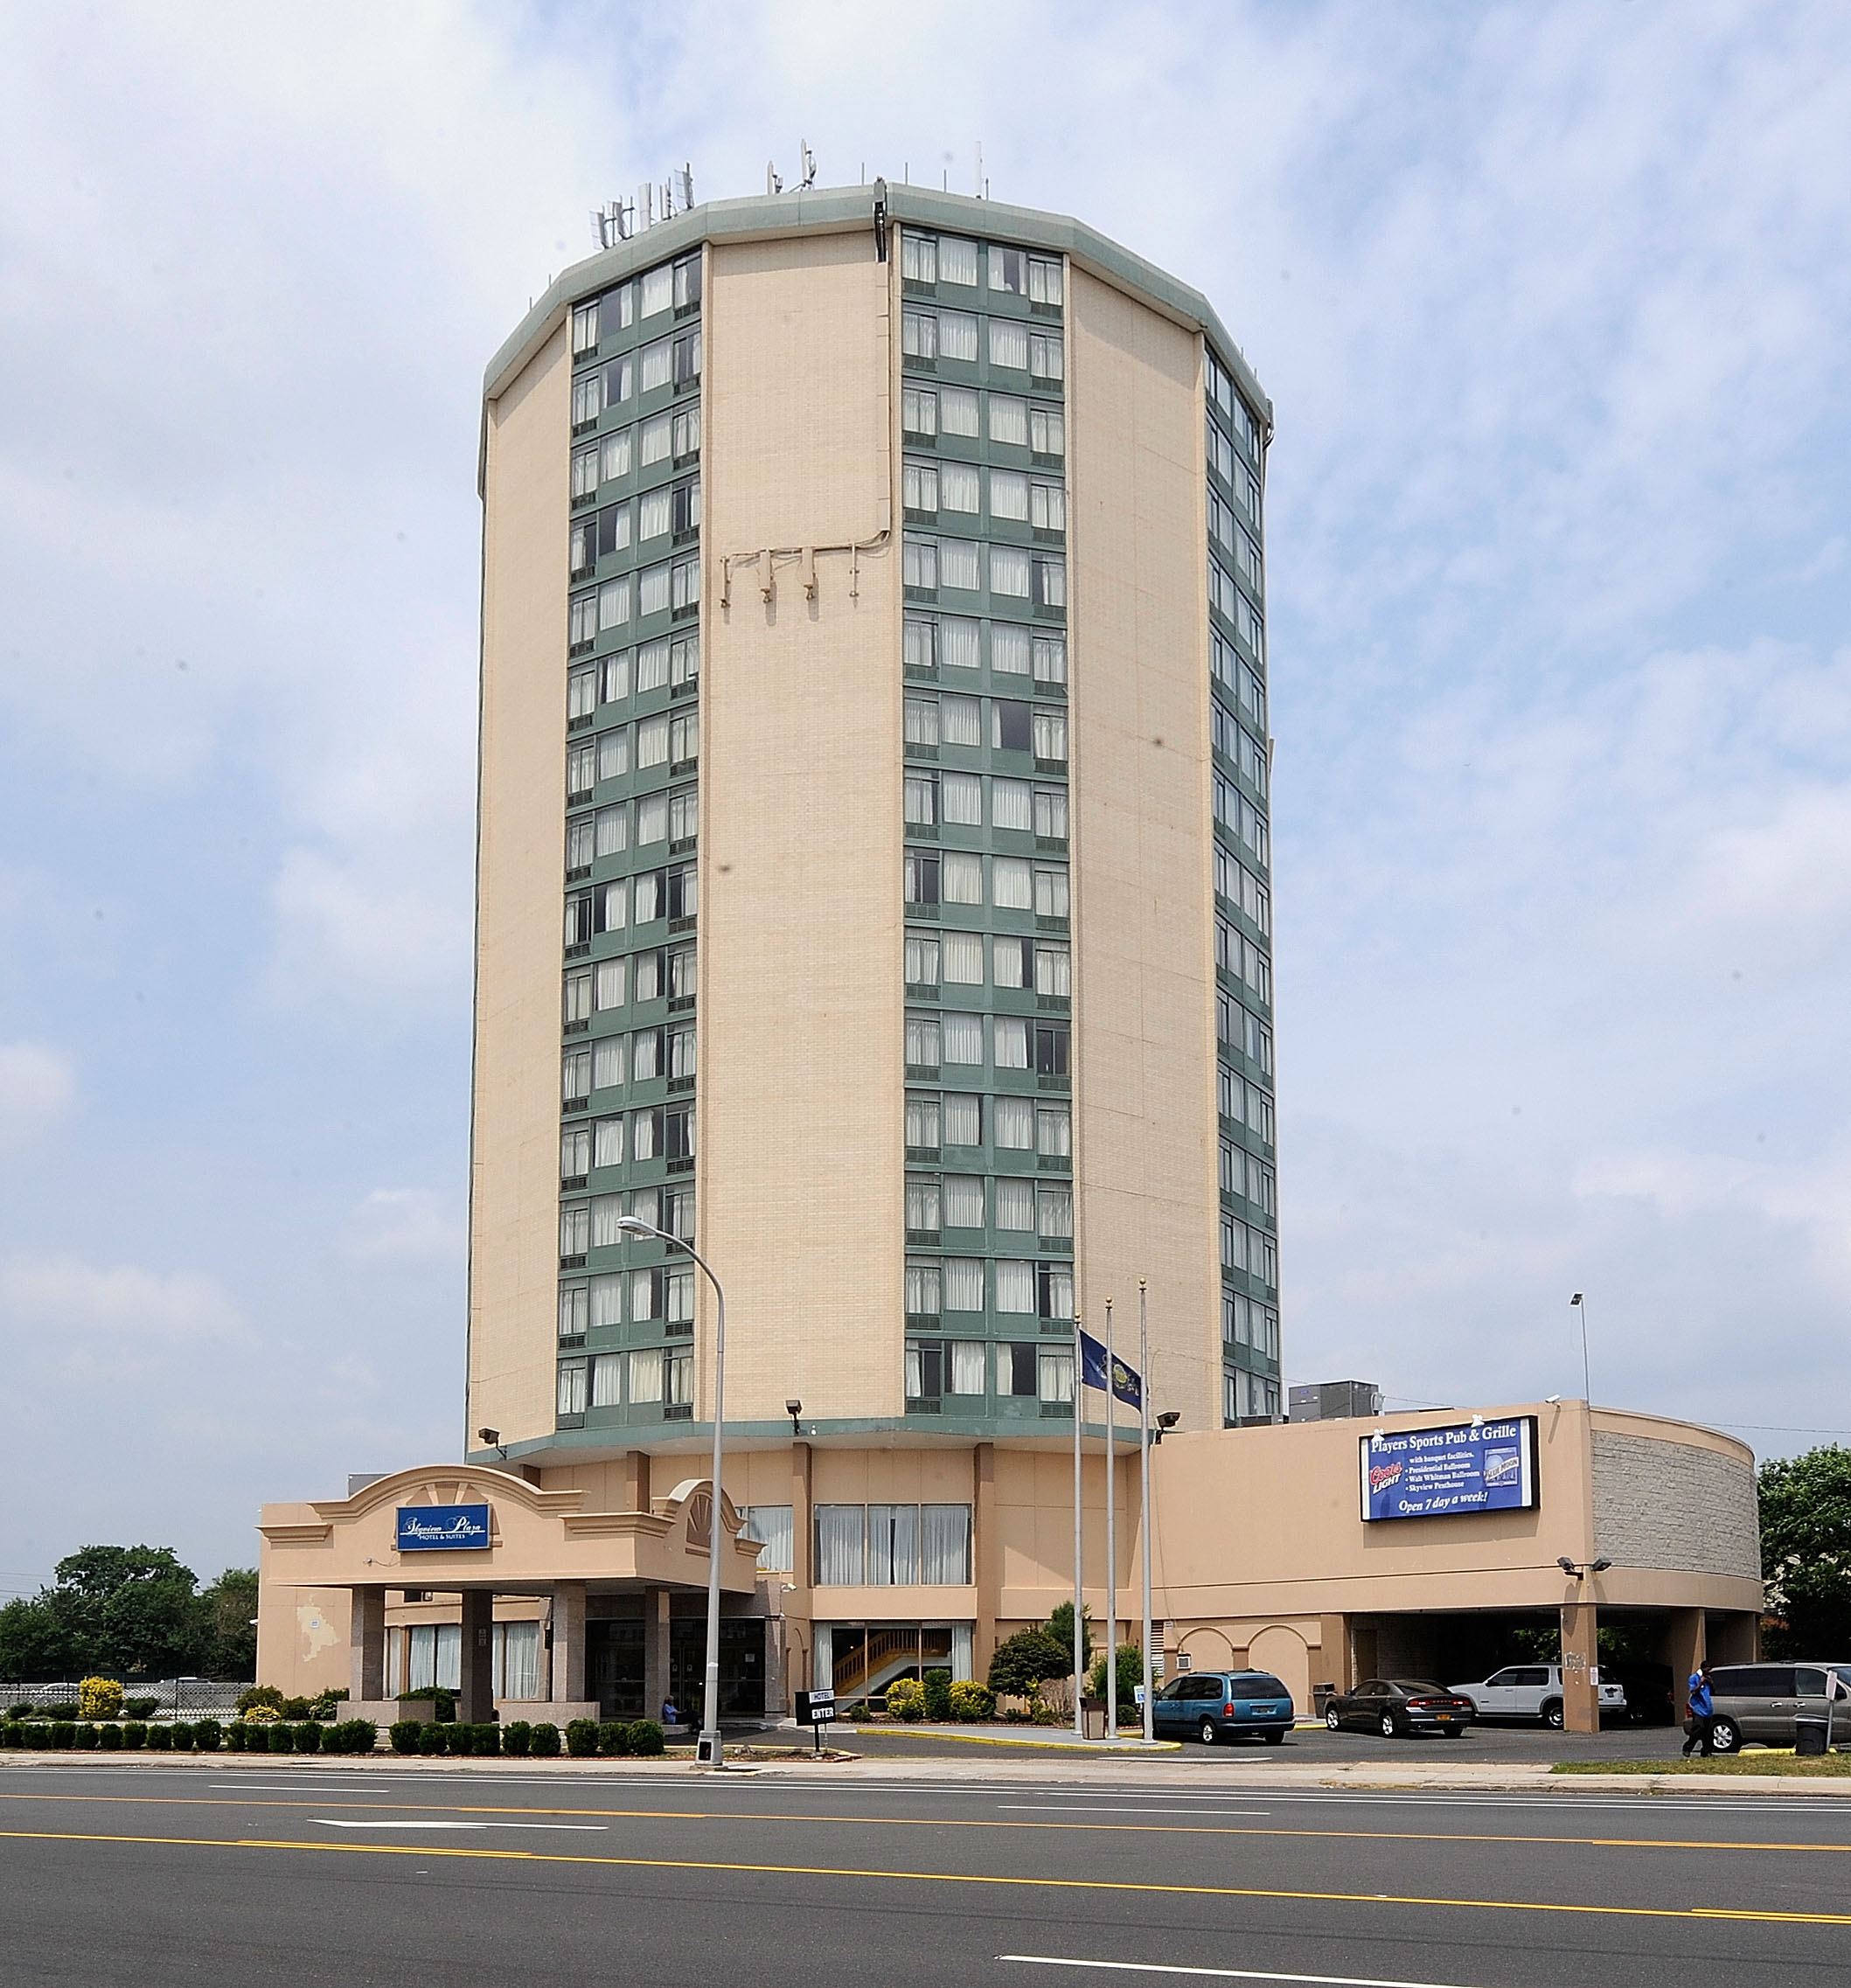 The Skyview Plaza Hotel in South Philadelphia is one of the city's largest tax delinquents. (Clem Murray / Inquirer)